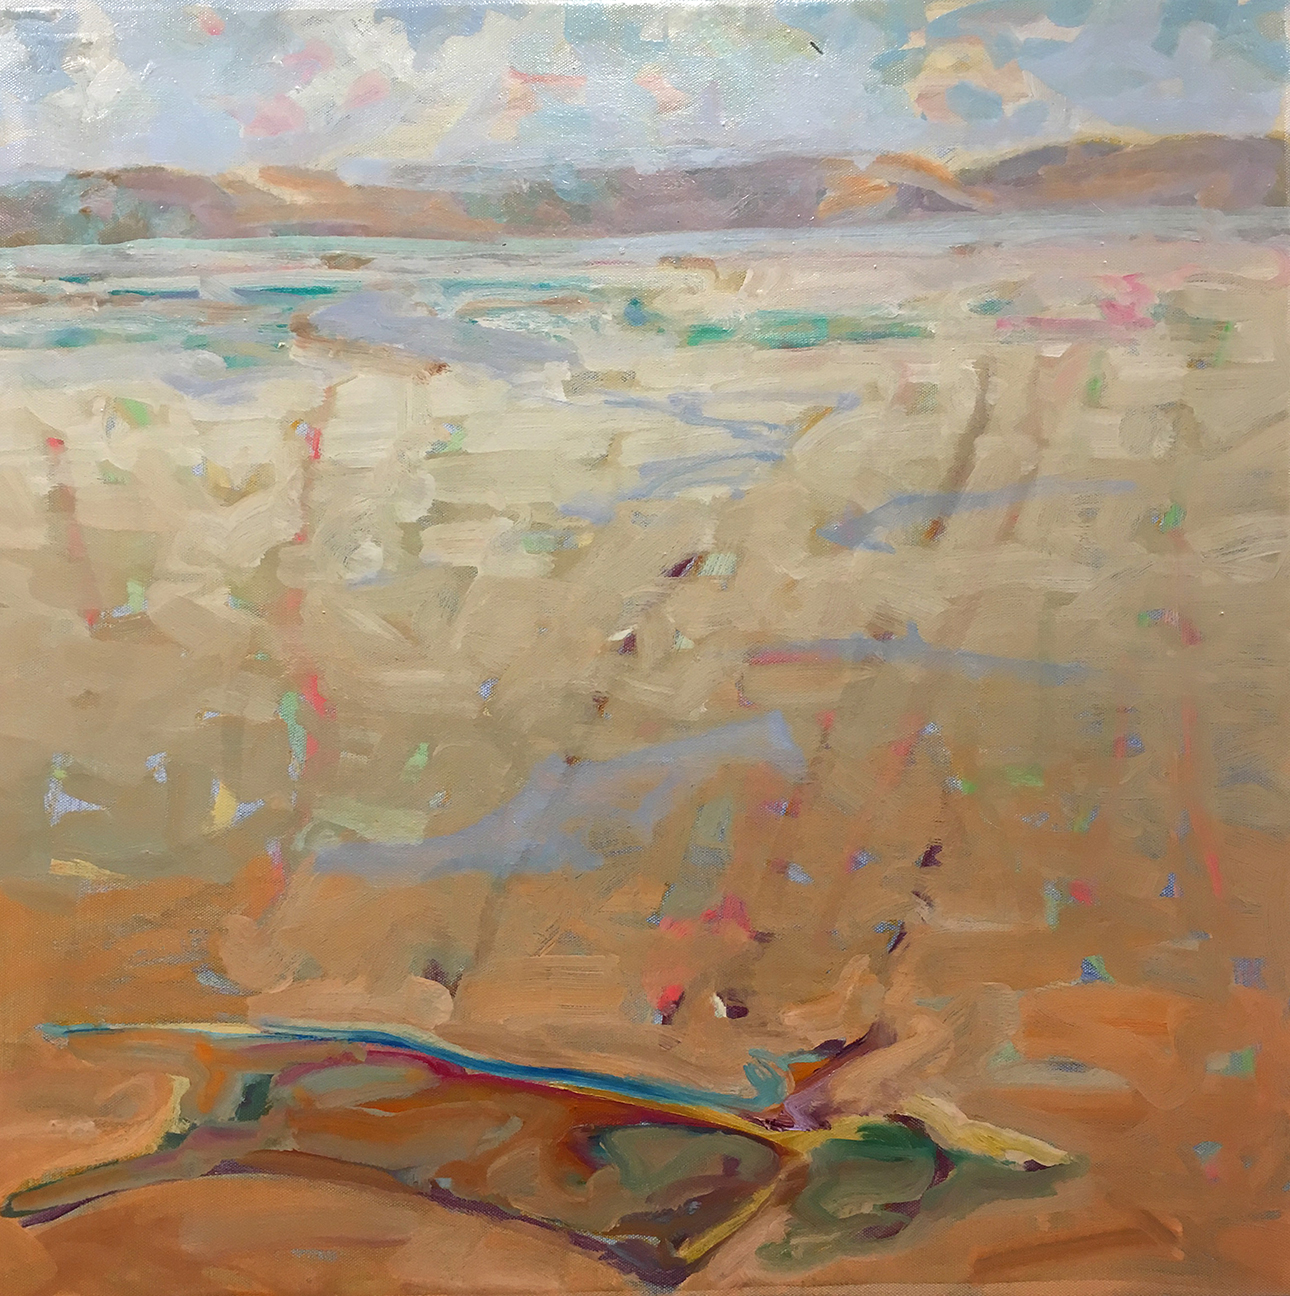 MountainLake02, Oilcanvas, 24x24, MelSmothers2015A, low res.jpg